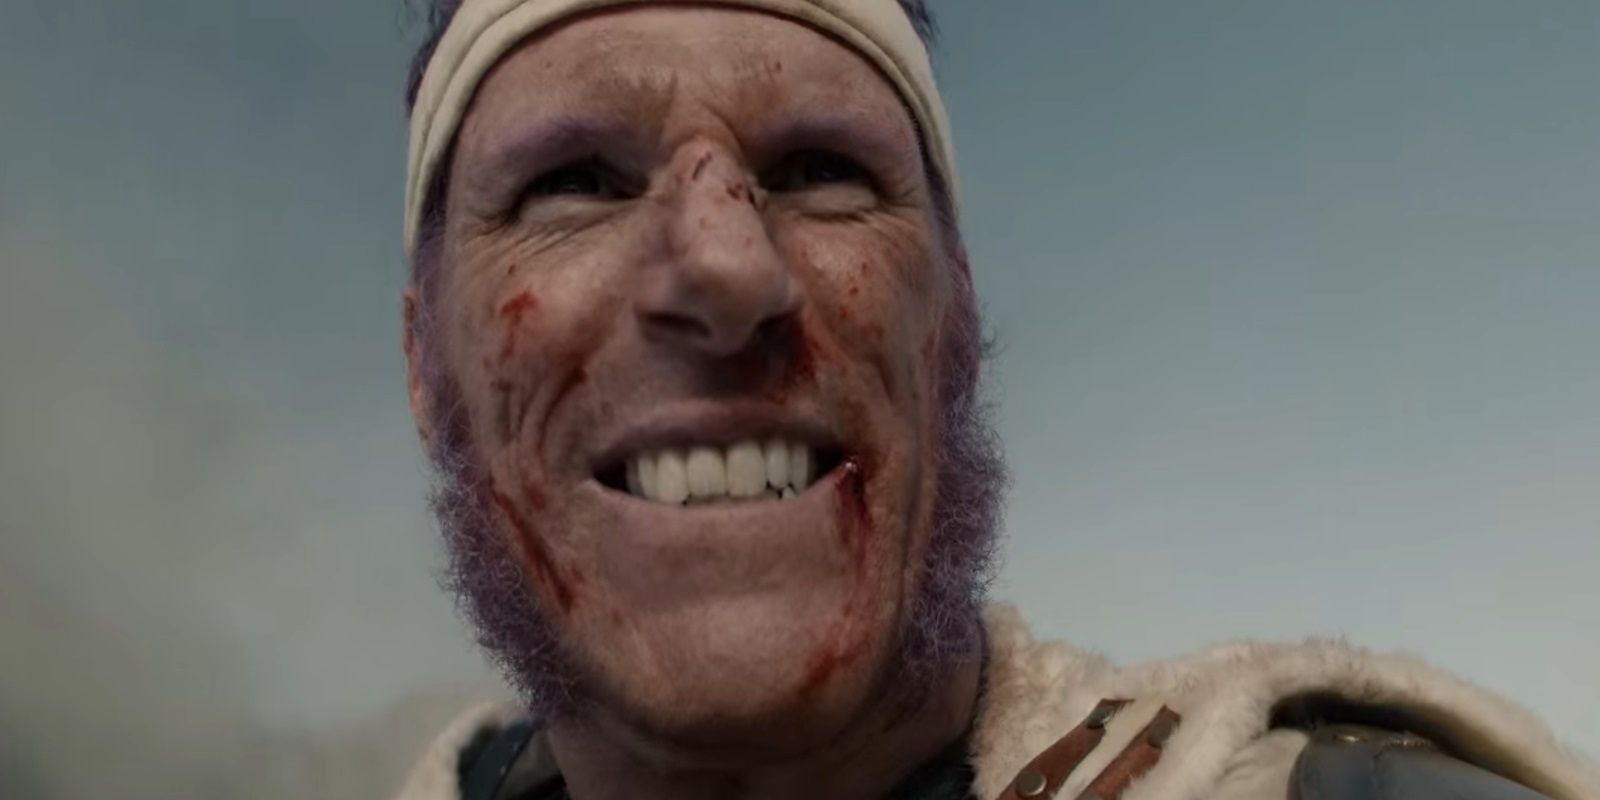 Don Krieg might be the least suited east blue villain for live action :  r/OnePieceLiveAction